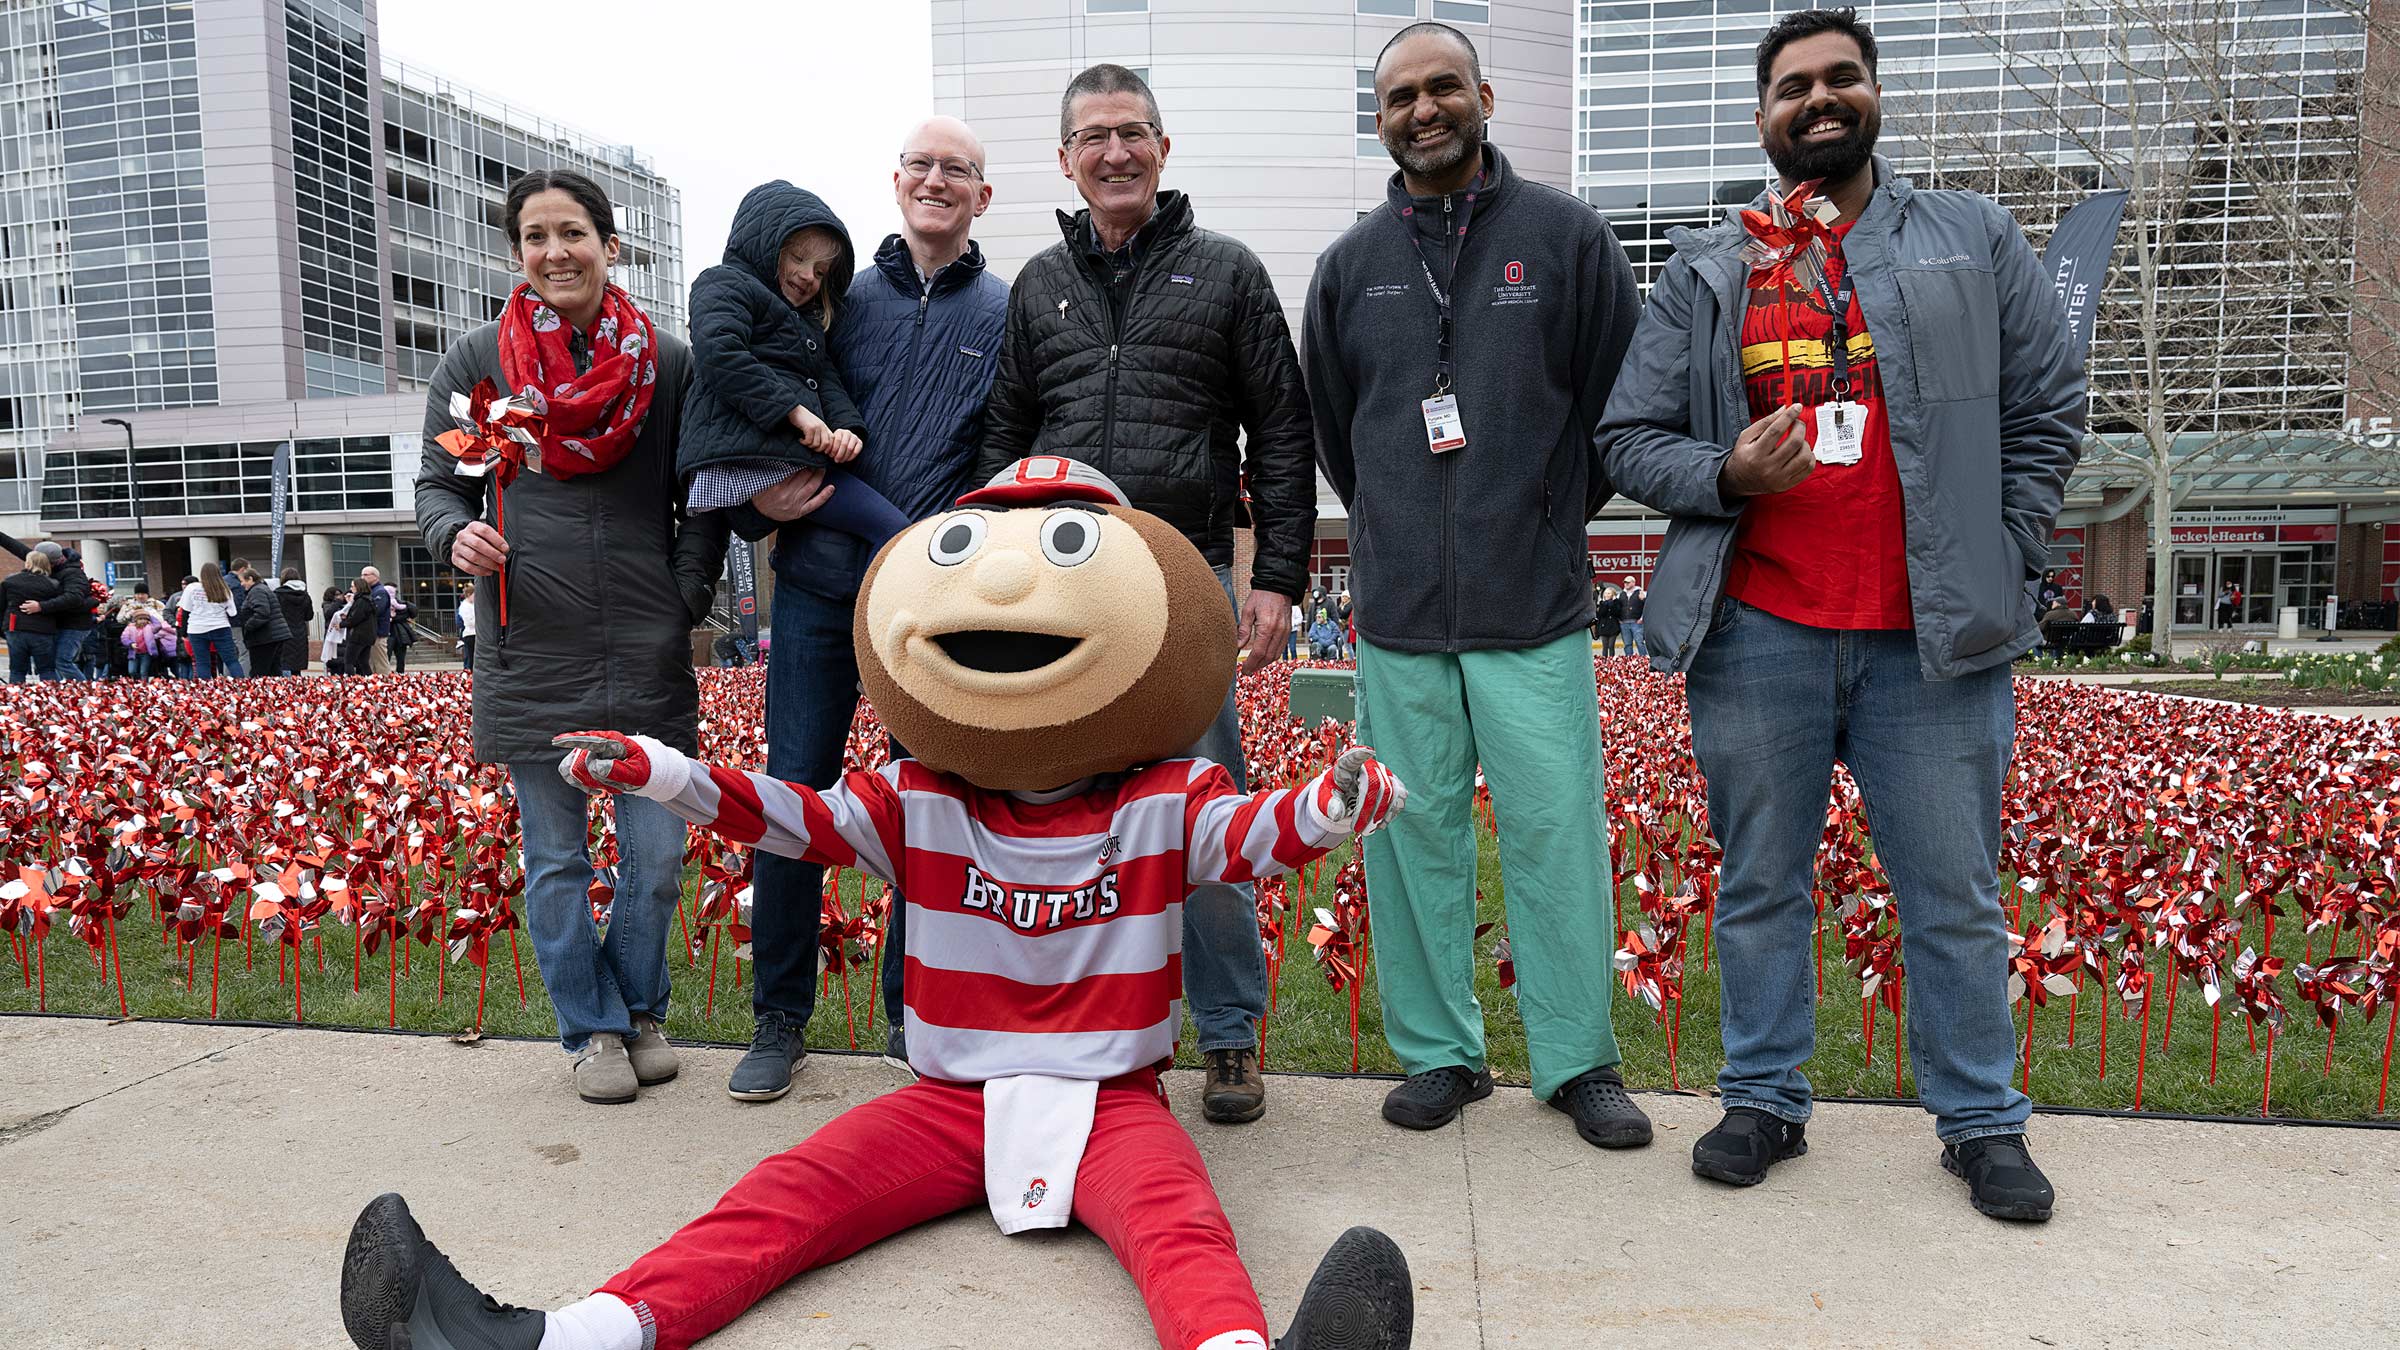 Dr. Washburn and other medical center staff standing with Brutus